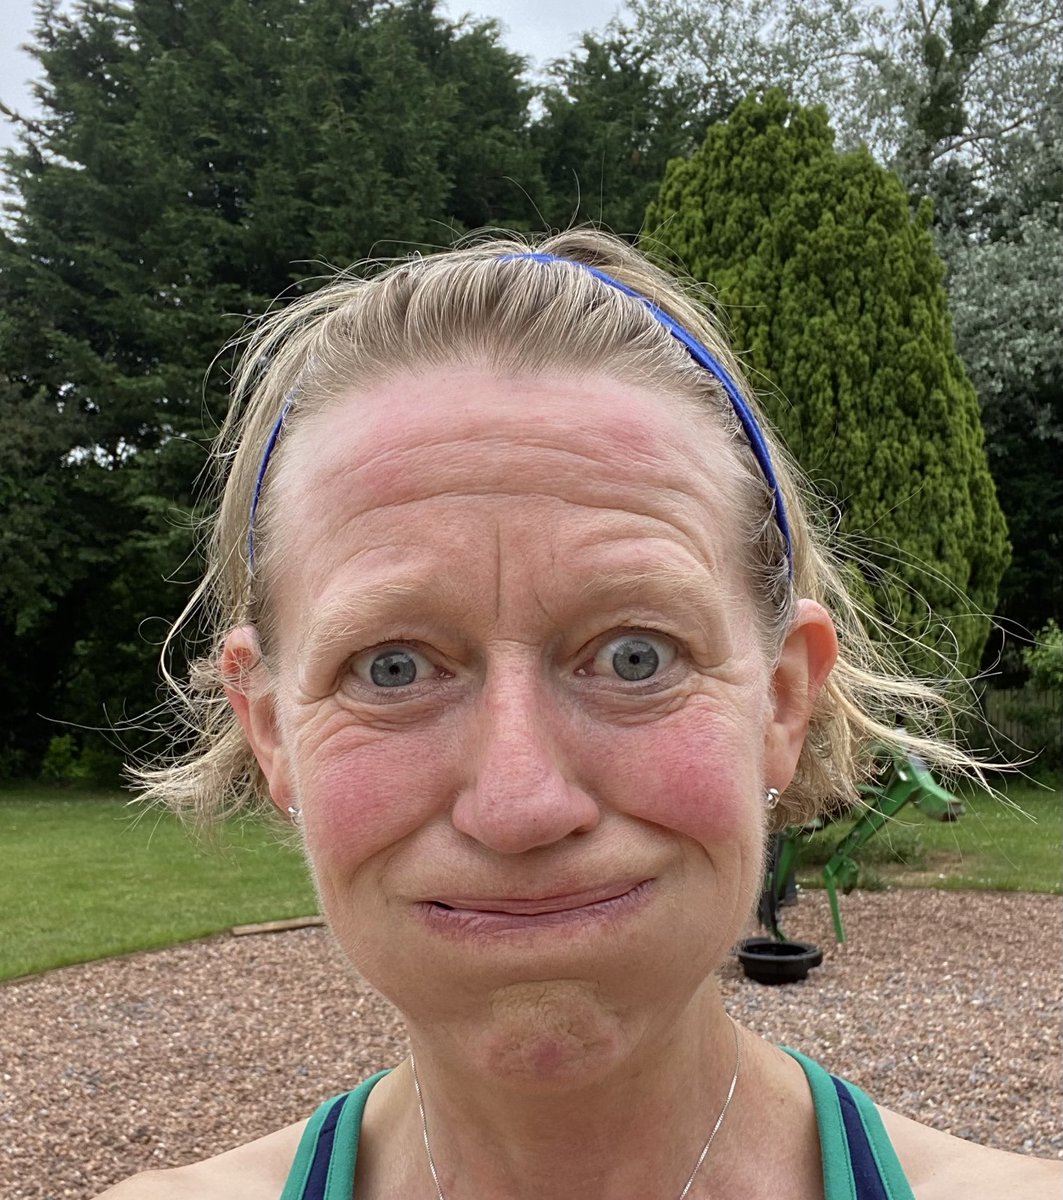 Happy to have opened my account today, running 116 miles during July for ⁦@samaritans⁩ #116123 #TeamRMJ ⁦@RunningMrJones⁩ with ⁦@emsmehrtens⁩  Hot and sweaty but worth it!